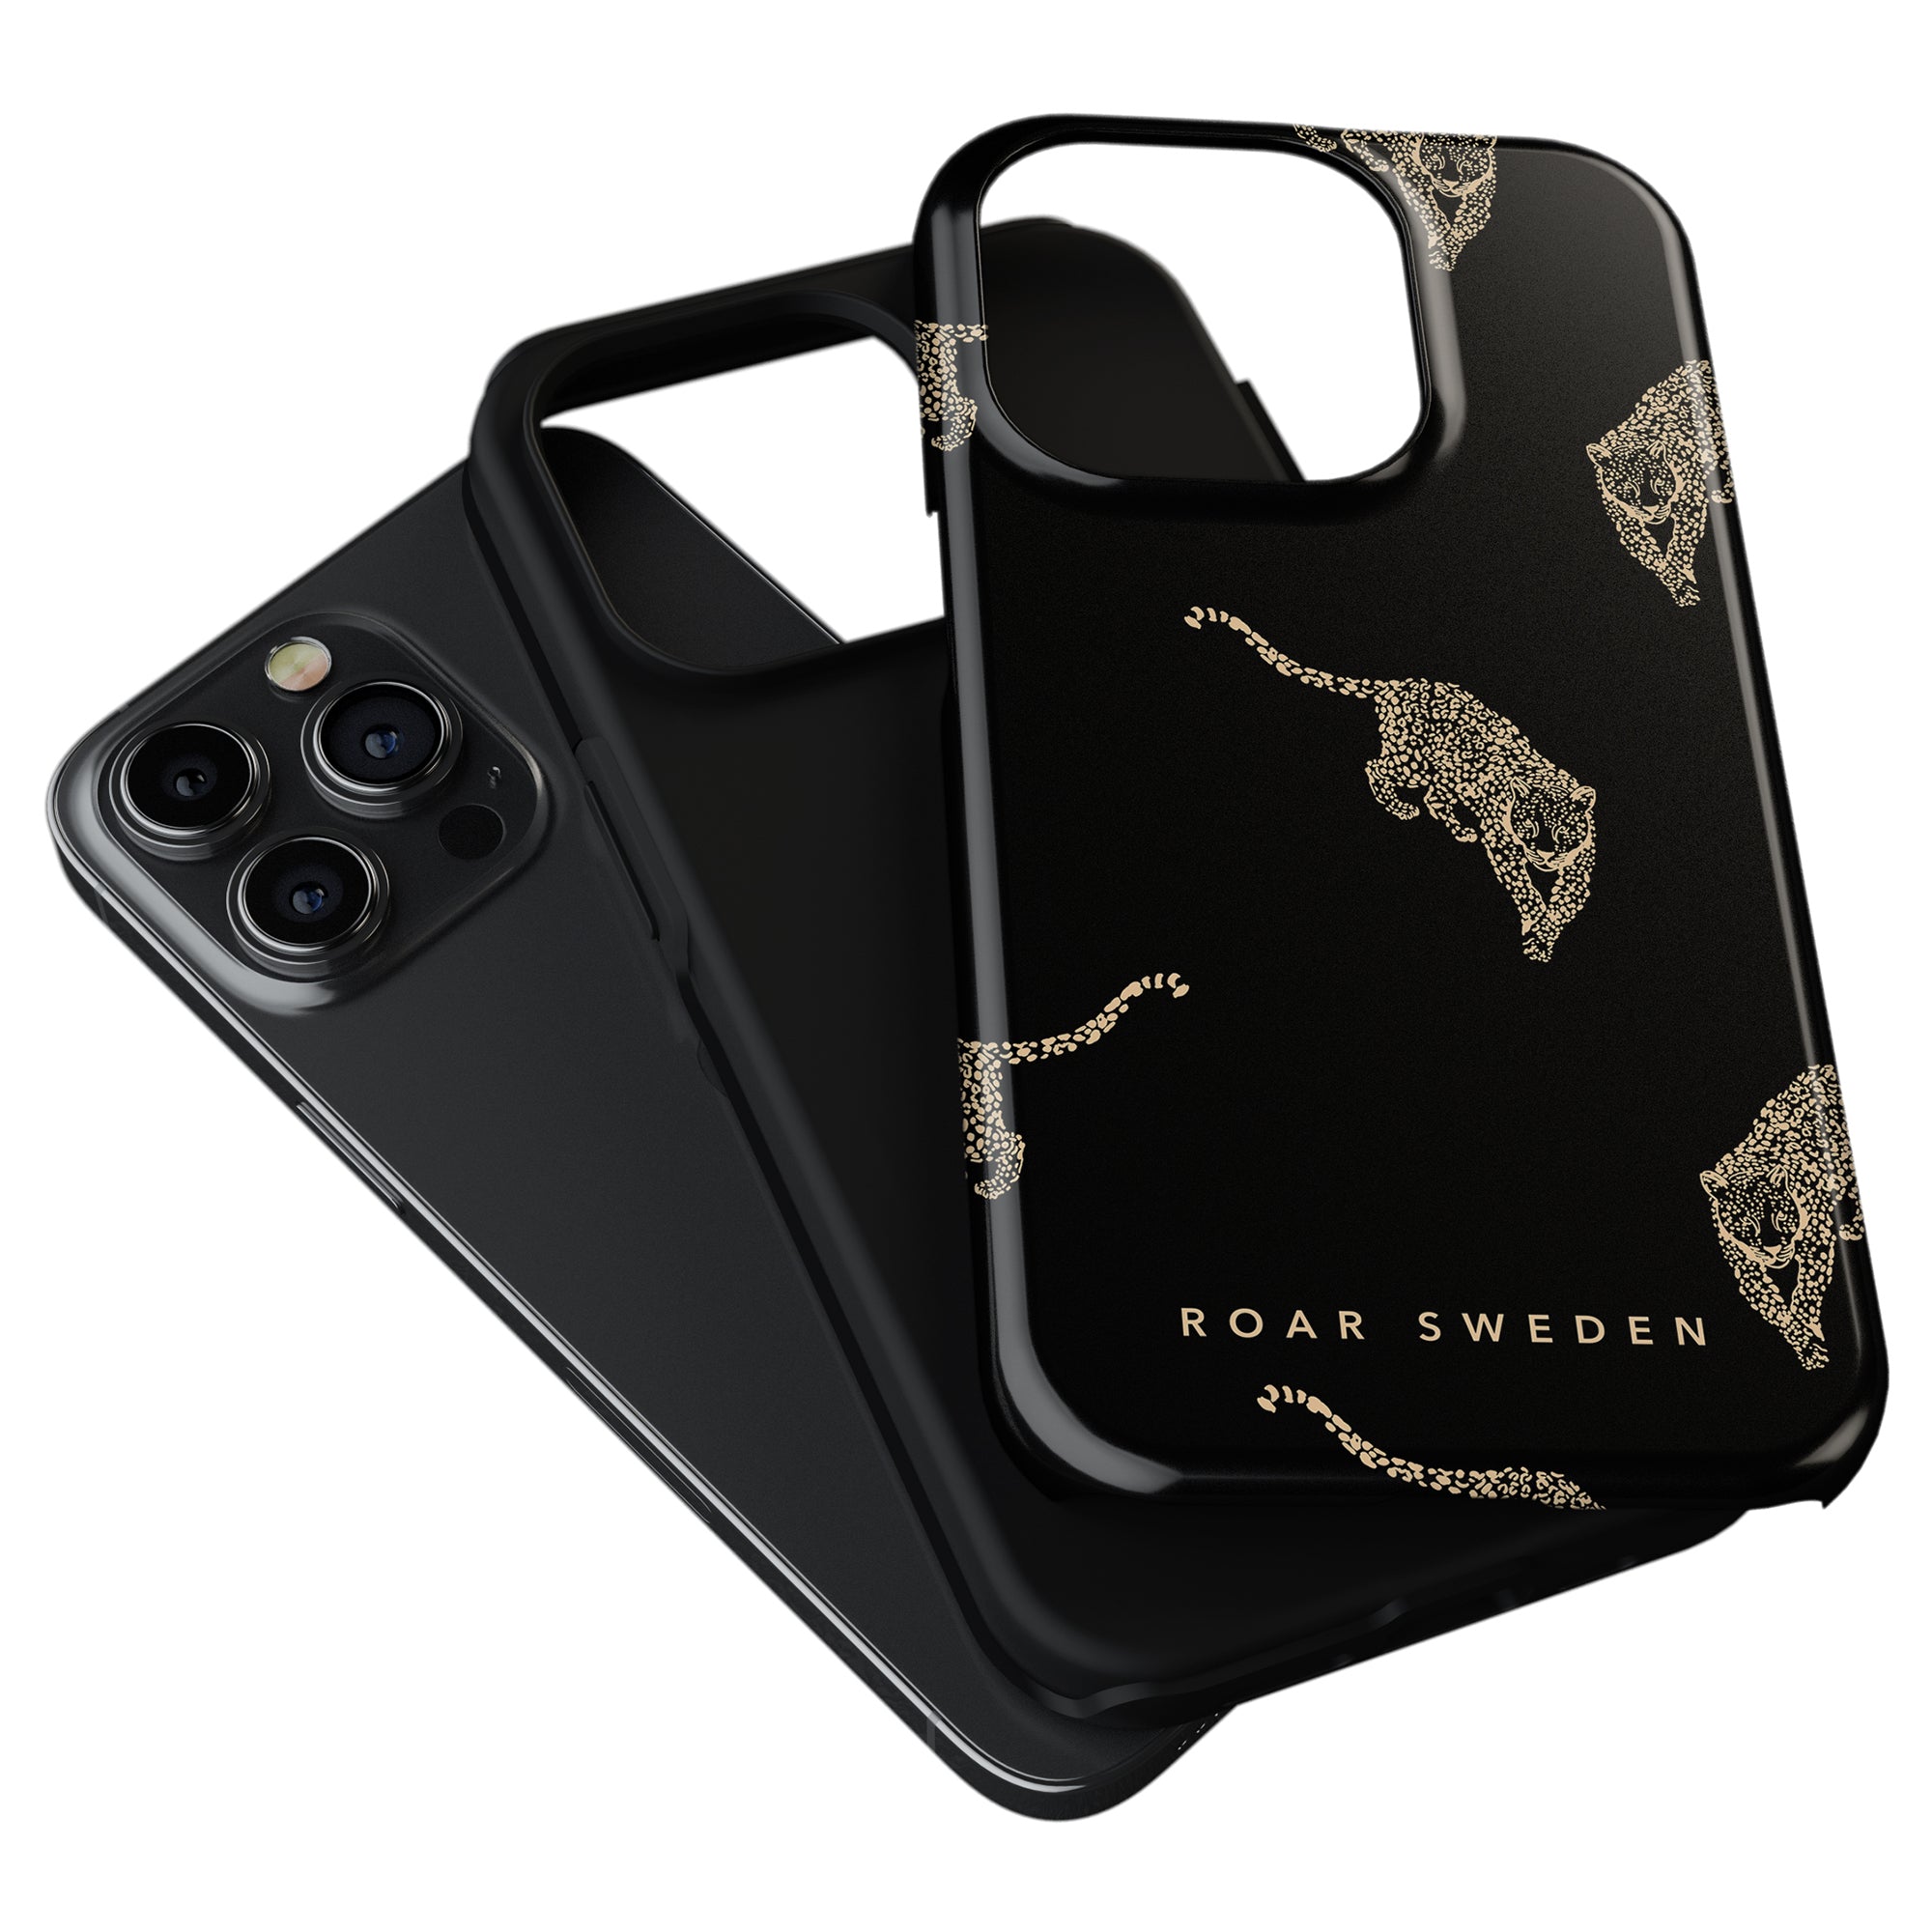 A Kitty Black - Tough Case with a leopard print, portable and stylish.